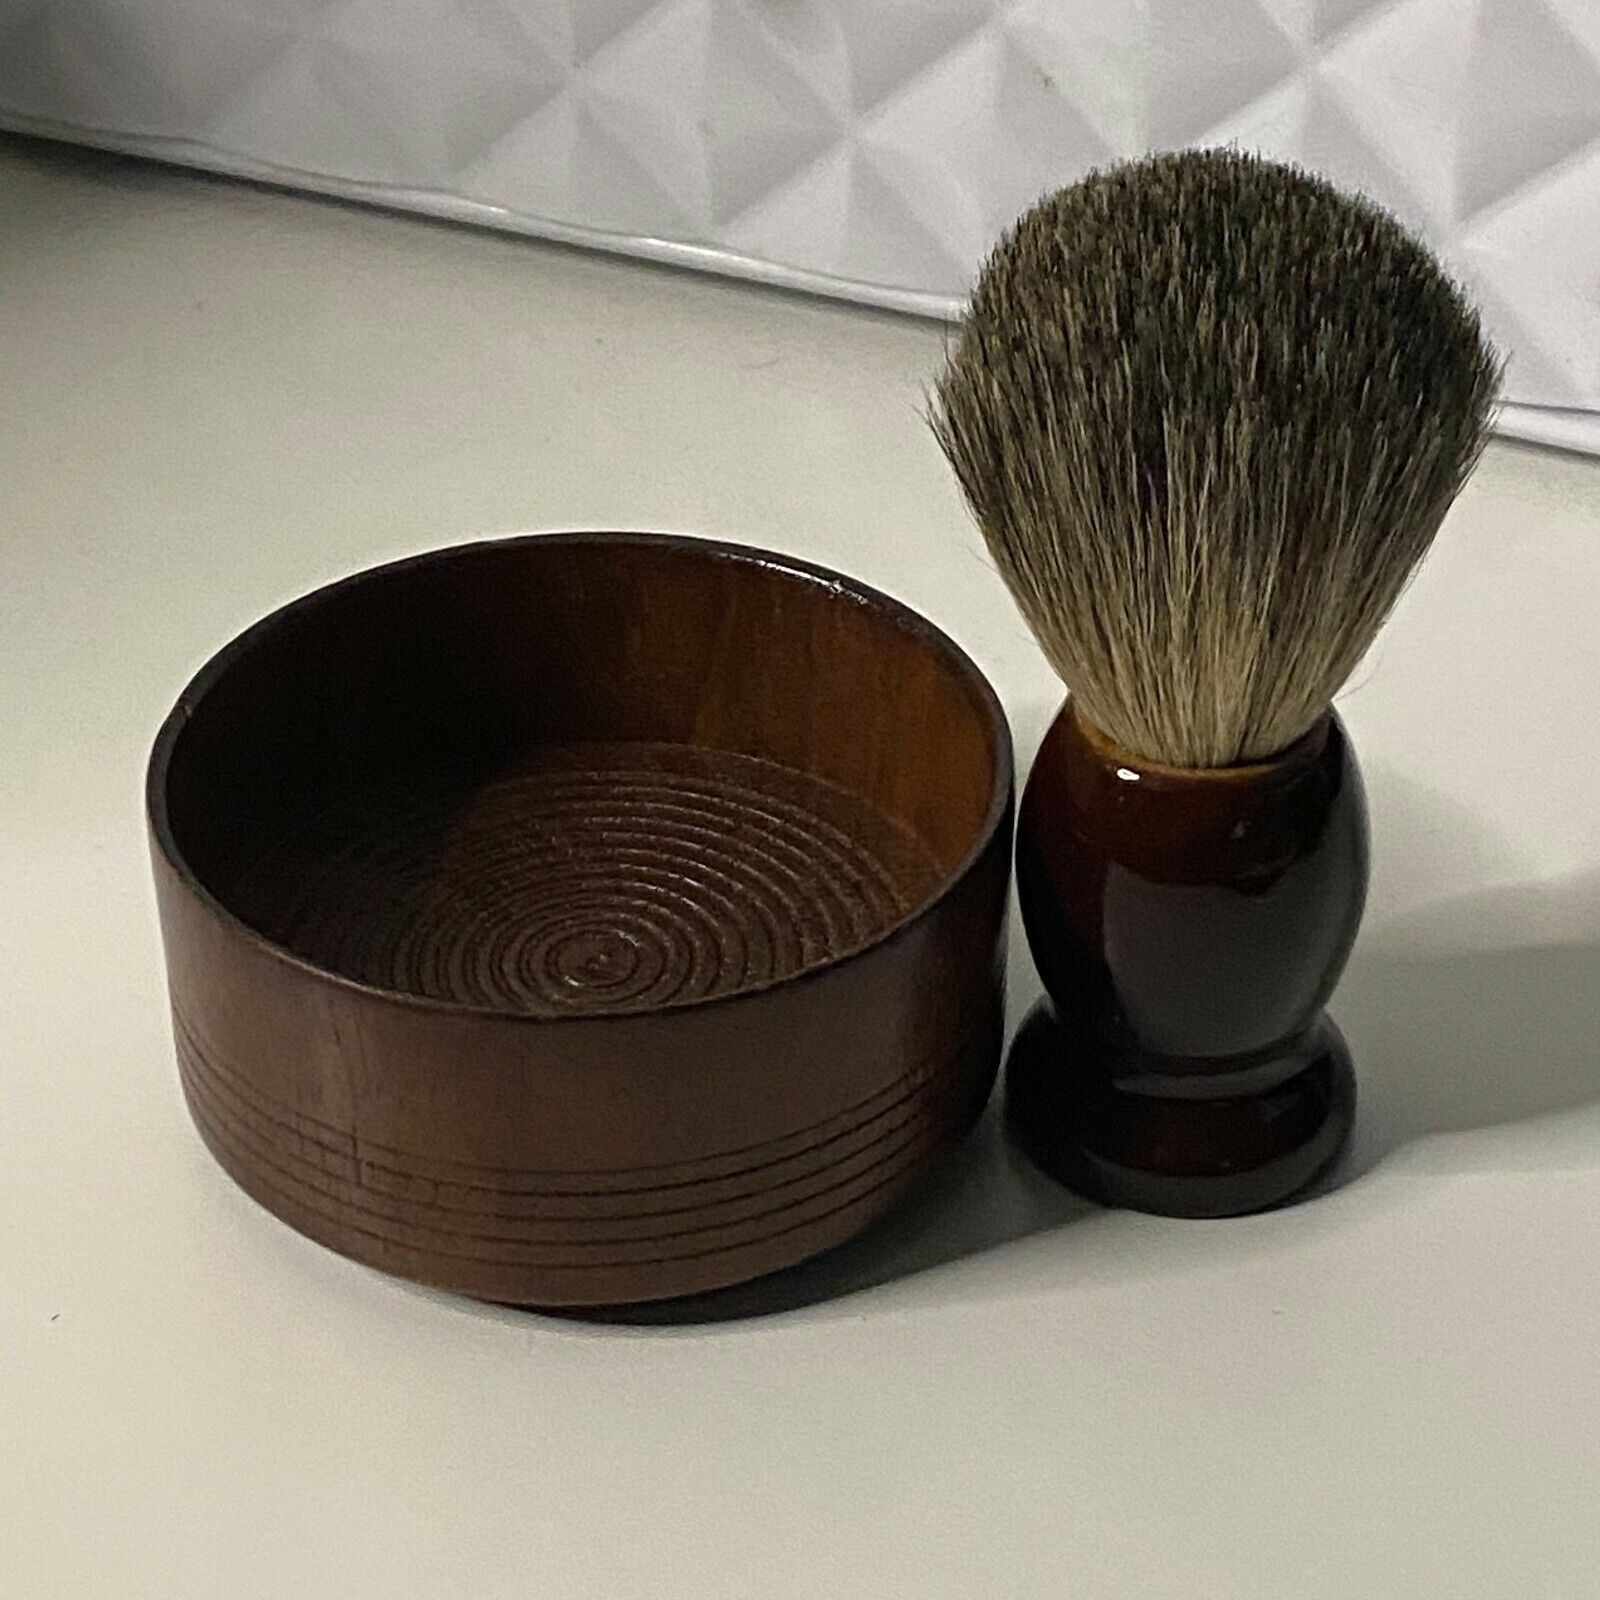 Real Badger Shaving Set - Perfect Valentines Gift